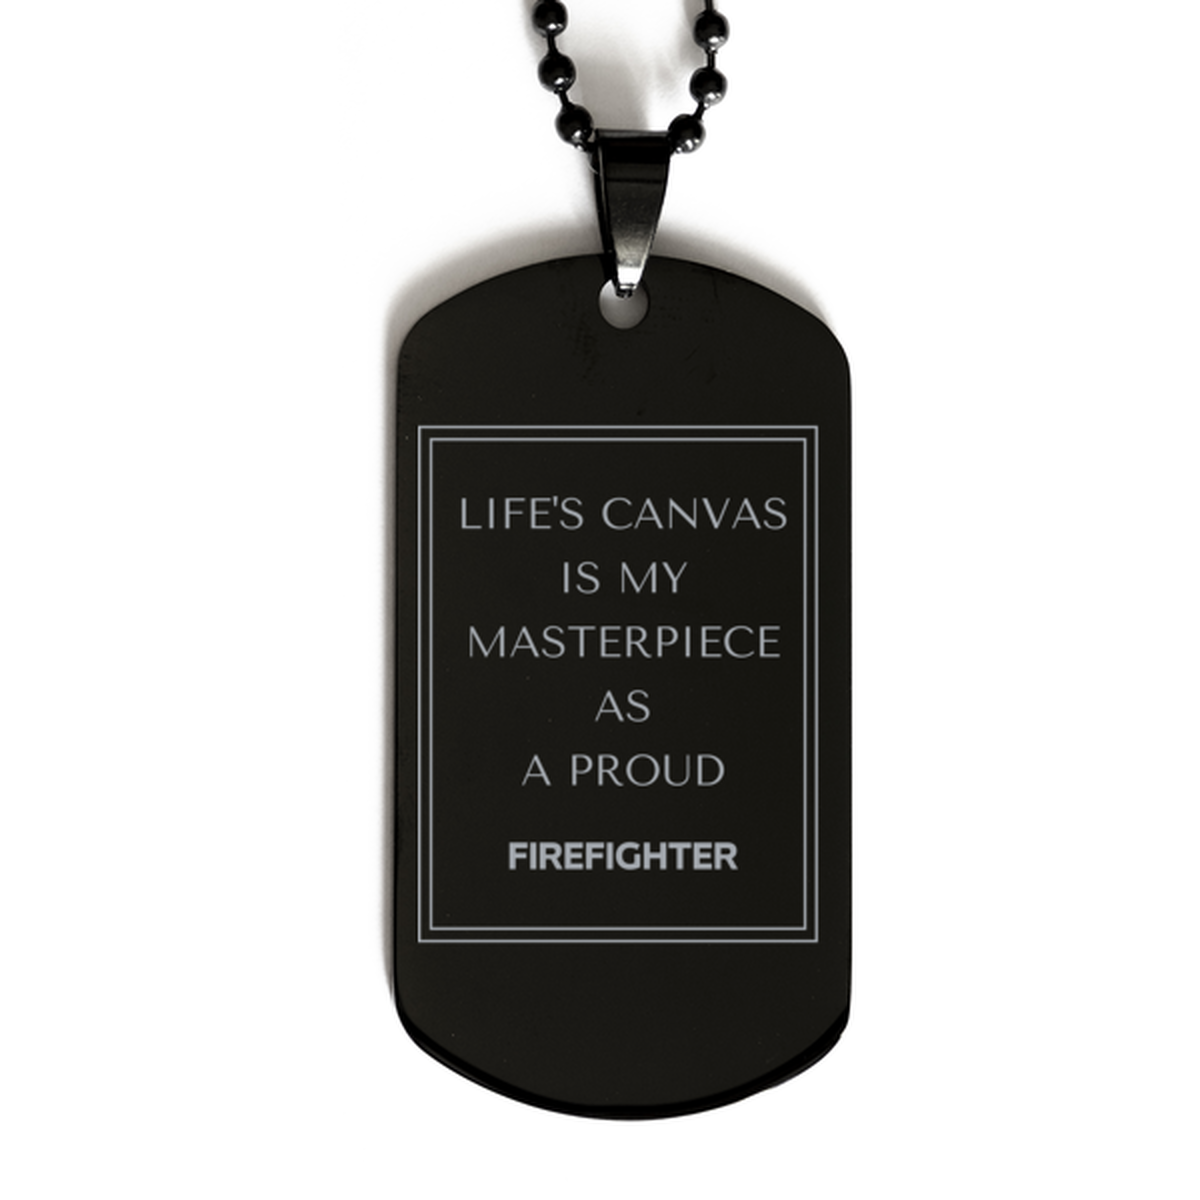 Proud Firefighter Gifts, Life's canvas is my masterpiece, Epic Birthday Christmas Unique Black Dog Tag For Firefighter, Coworkers, Men, Women, Friends